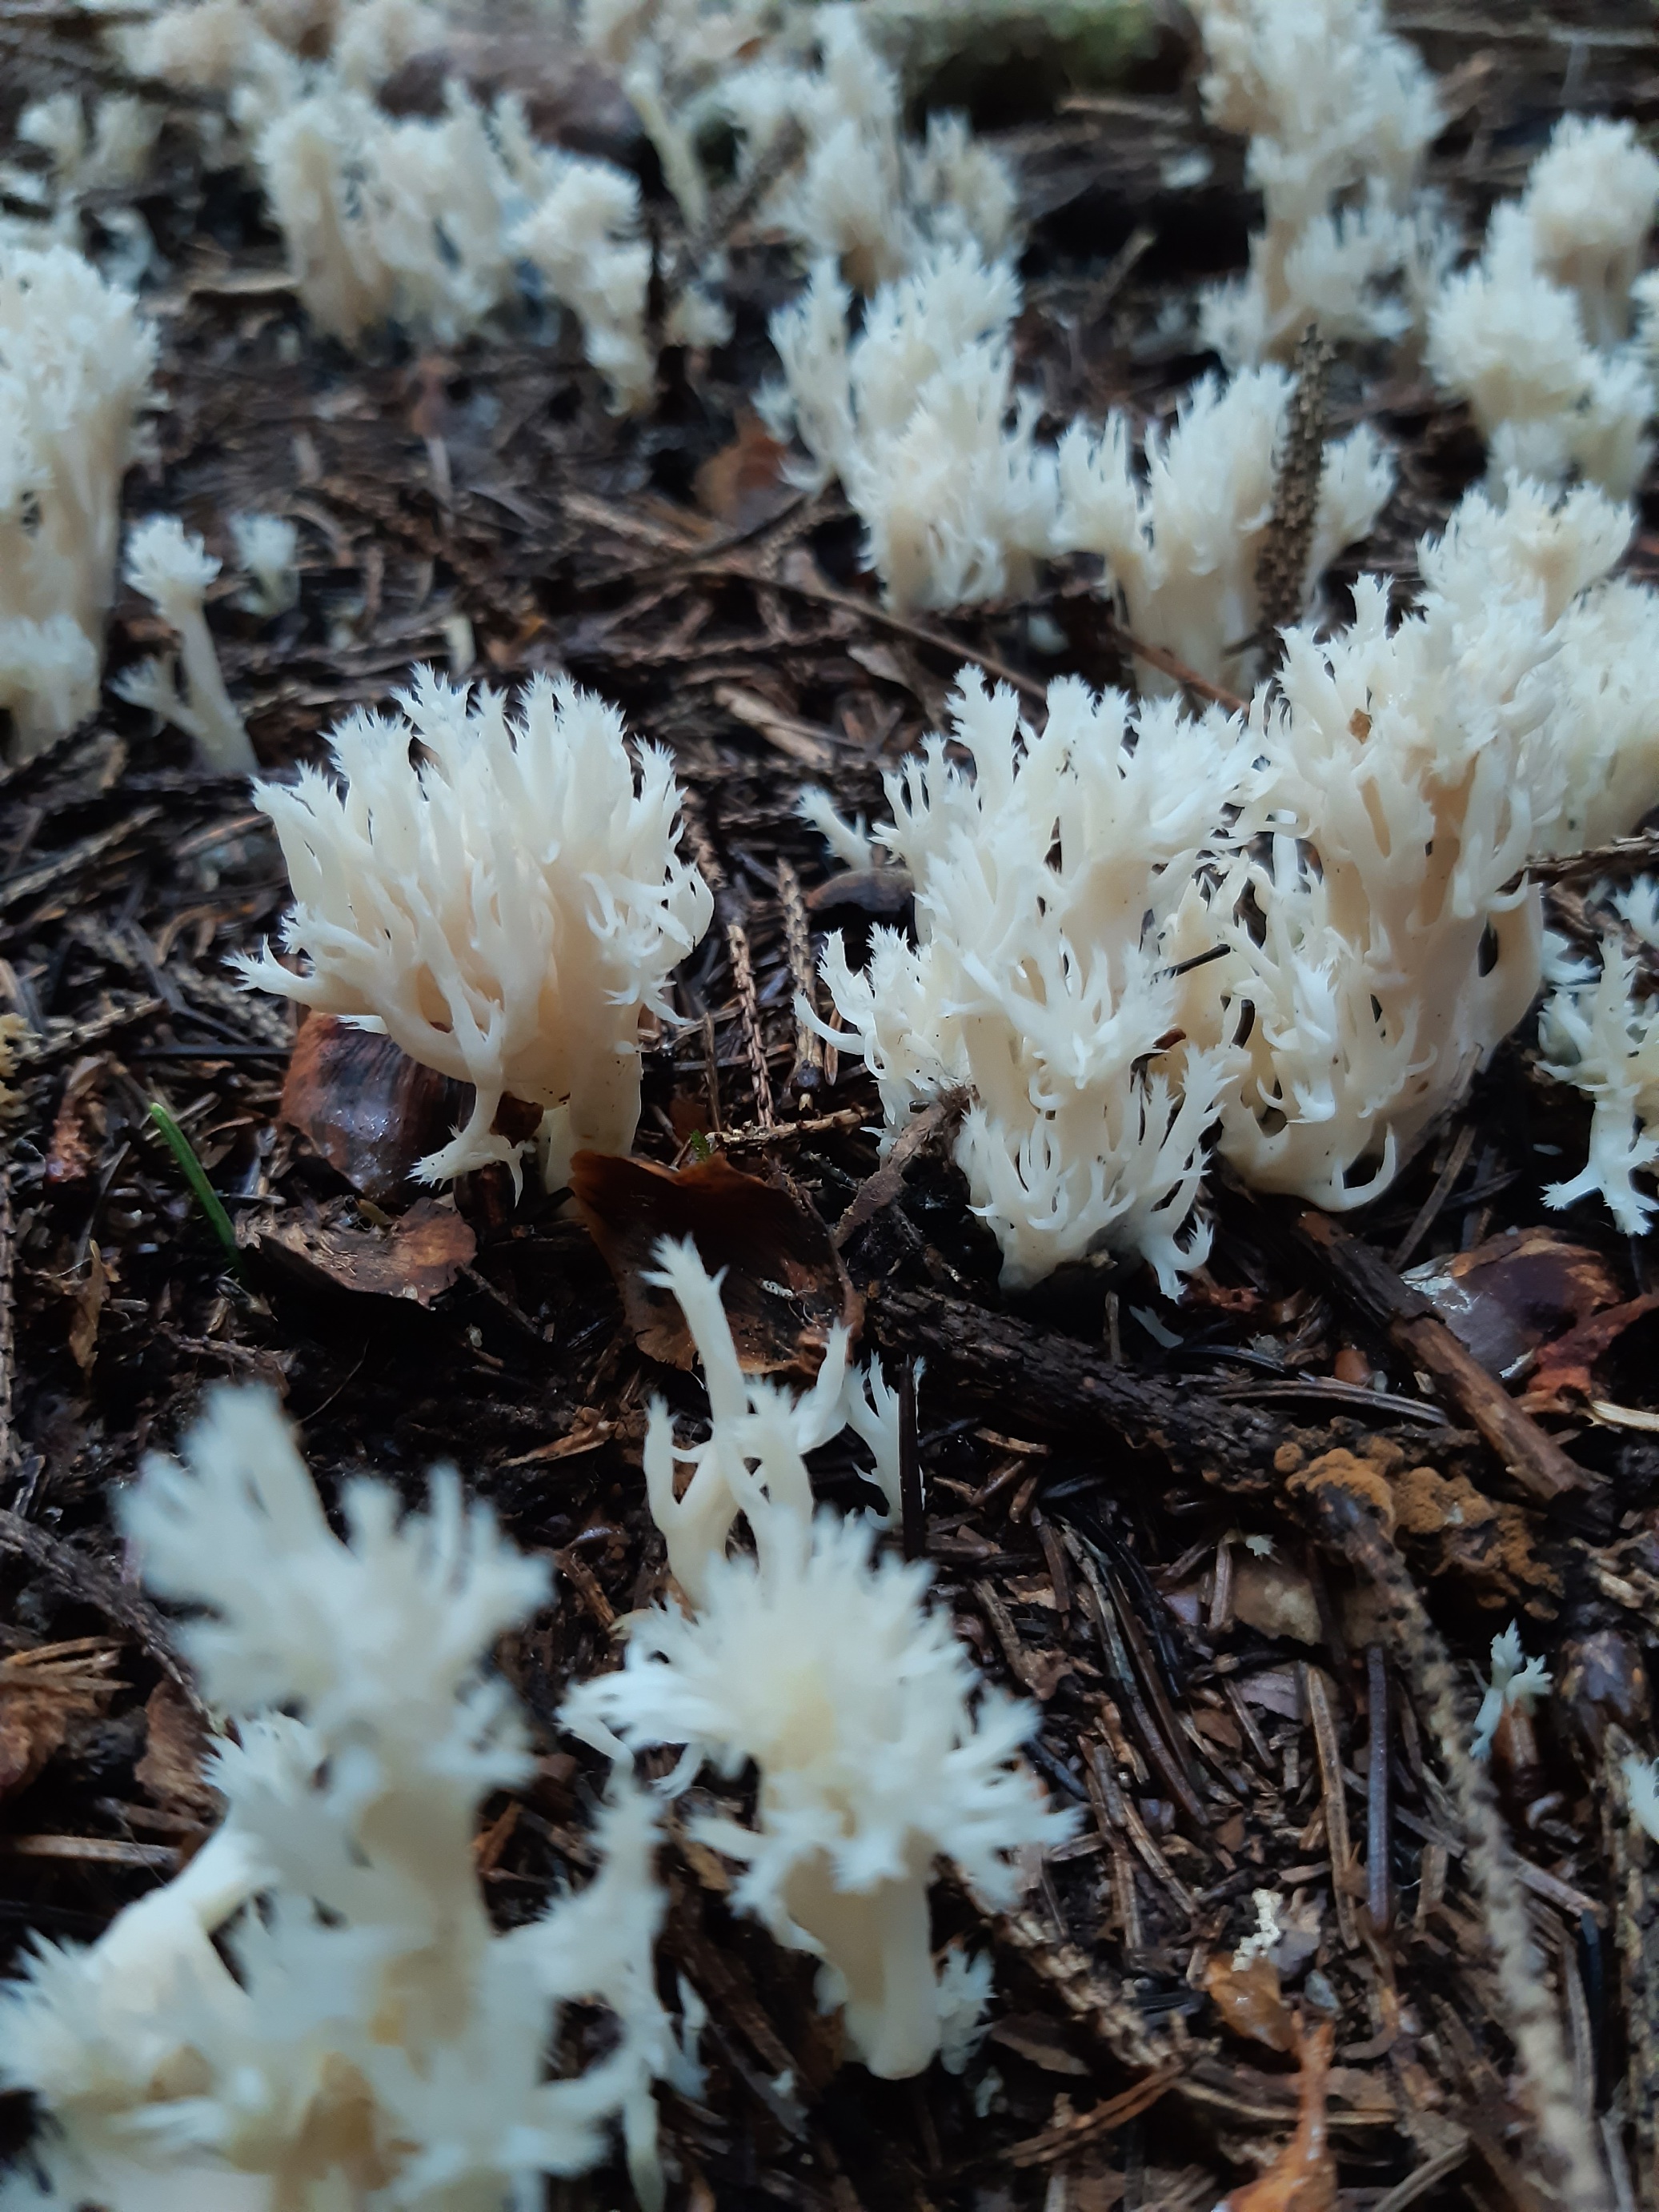 some clavulina coralloides (i think)